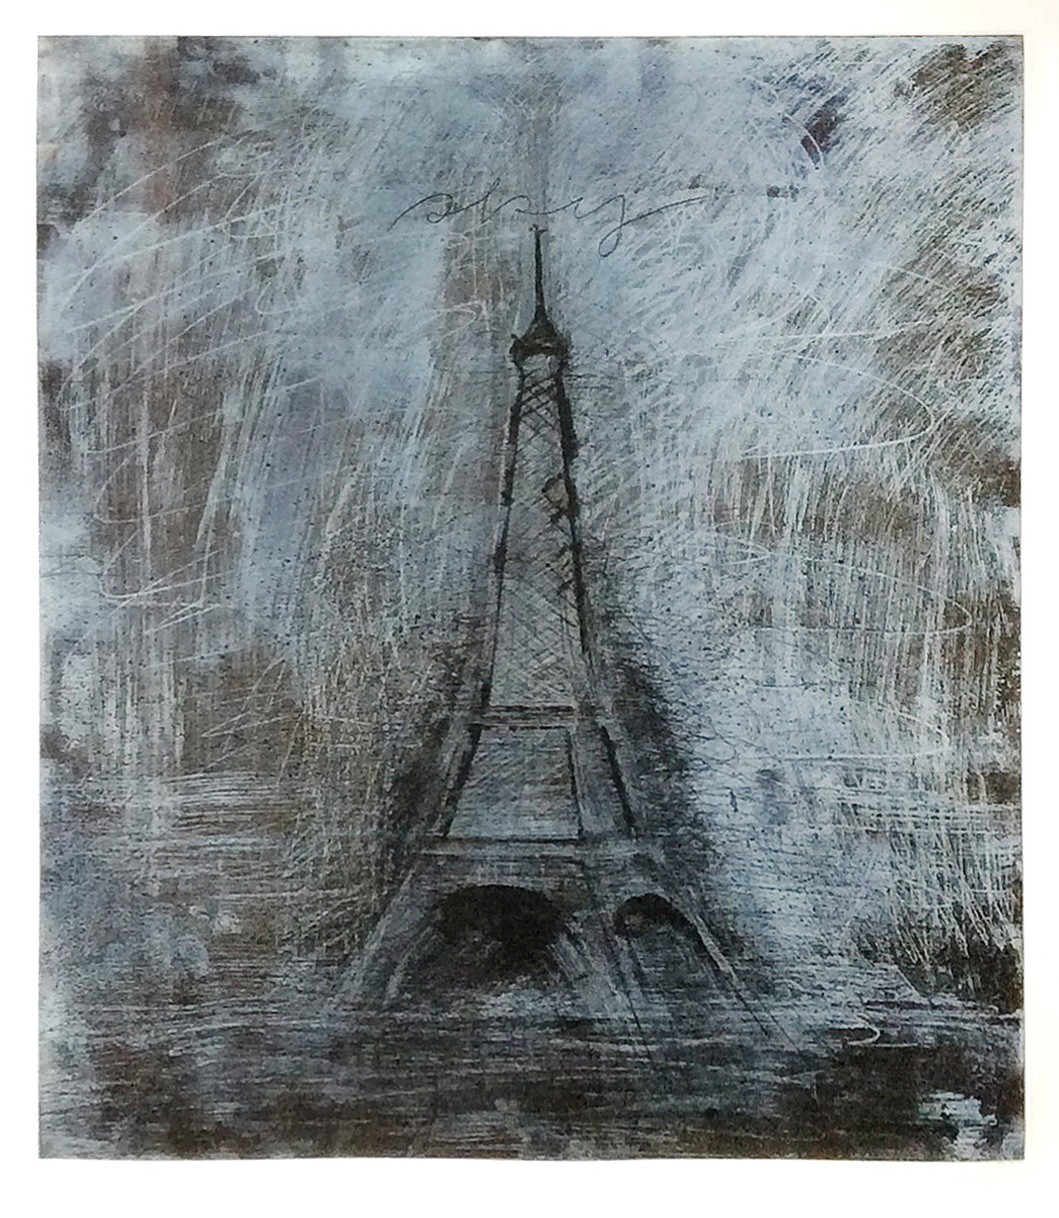 Jim Dine, Eiffel Tower, Etching, Collection of Michael Dickter and Nancy Whittaker